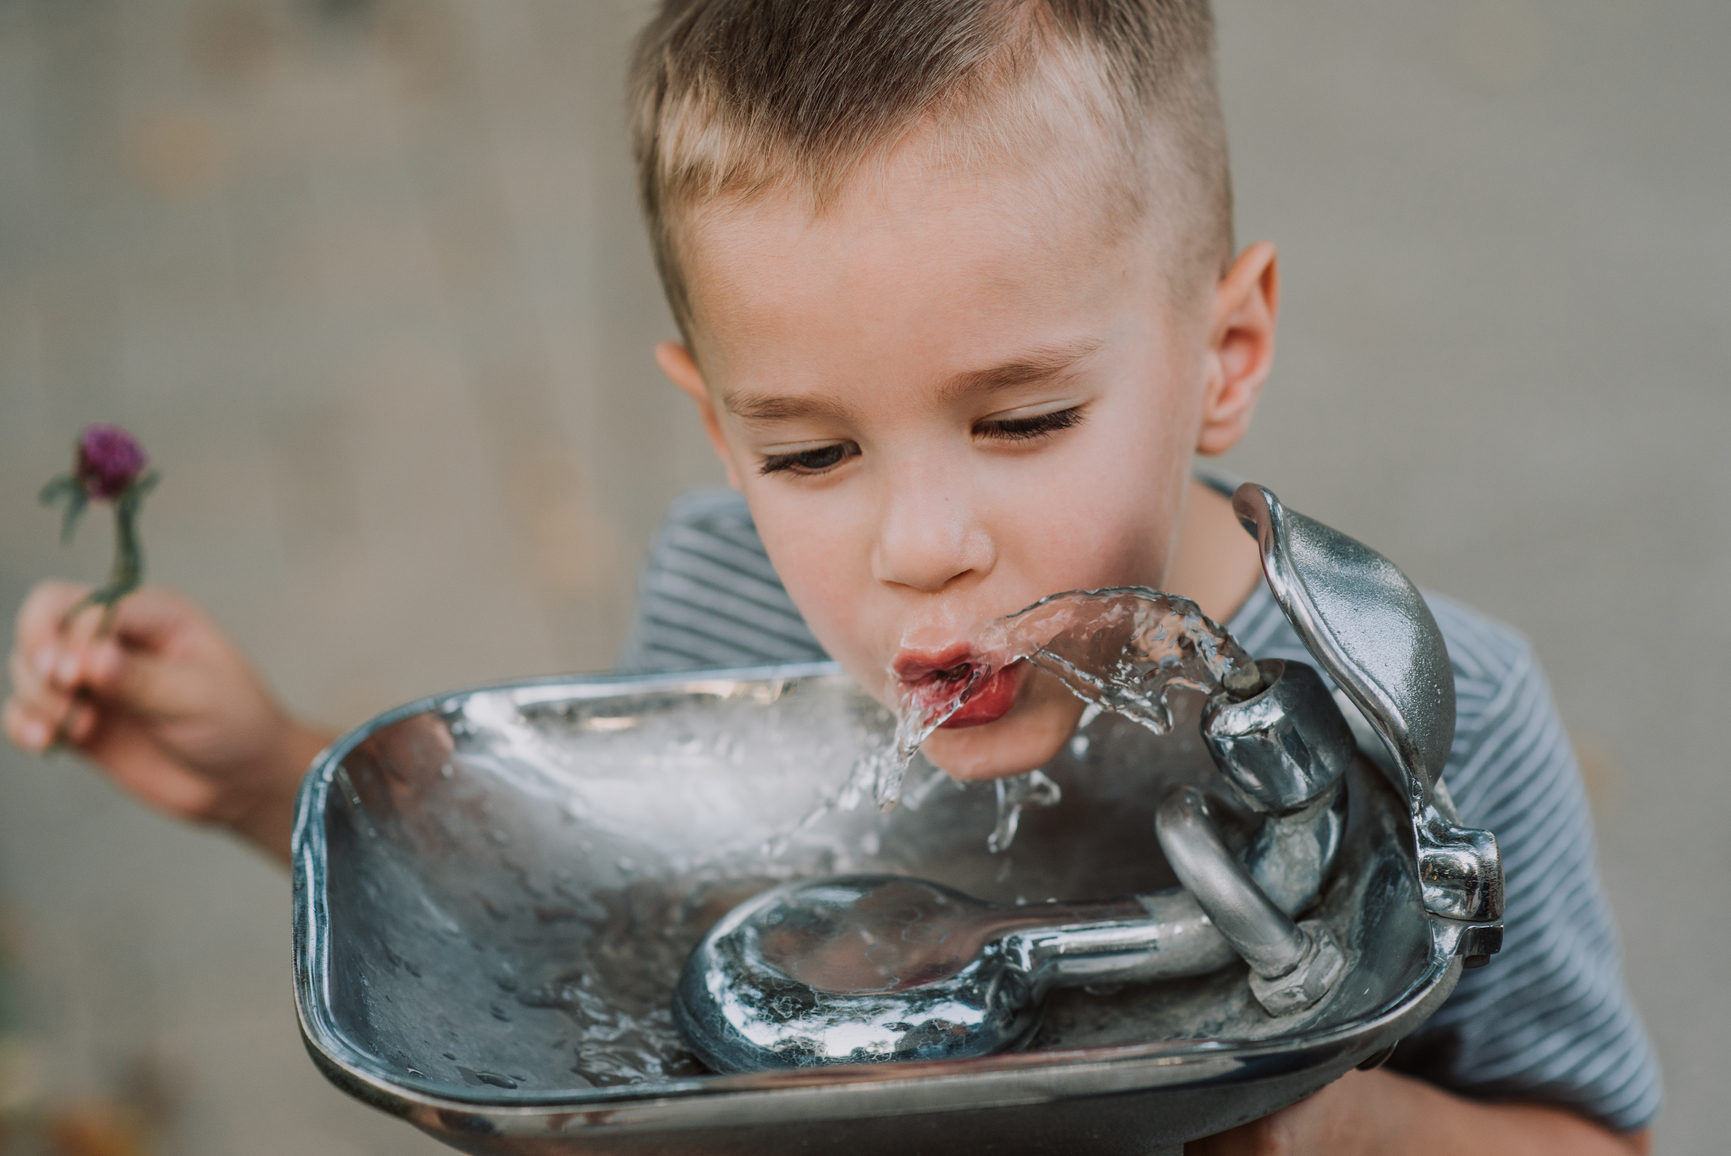 Why we need fluoride in our drinking water